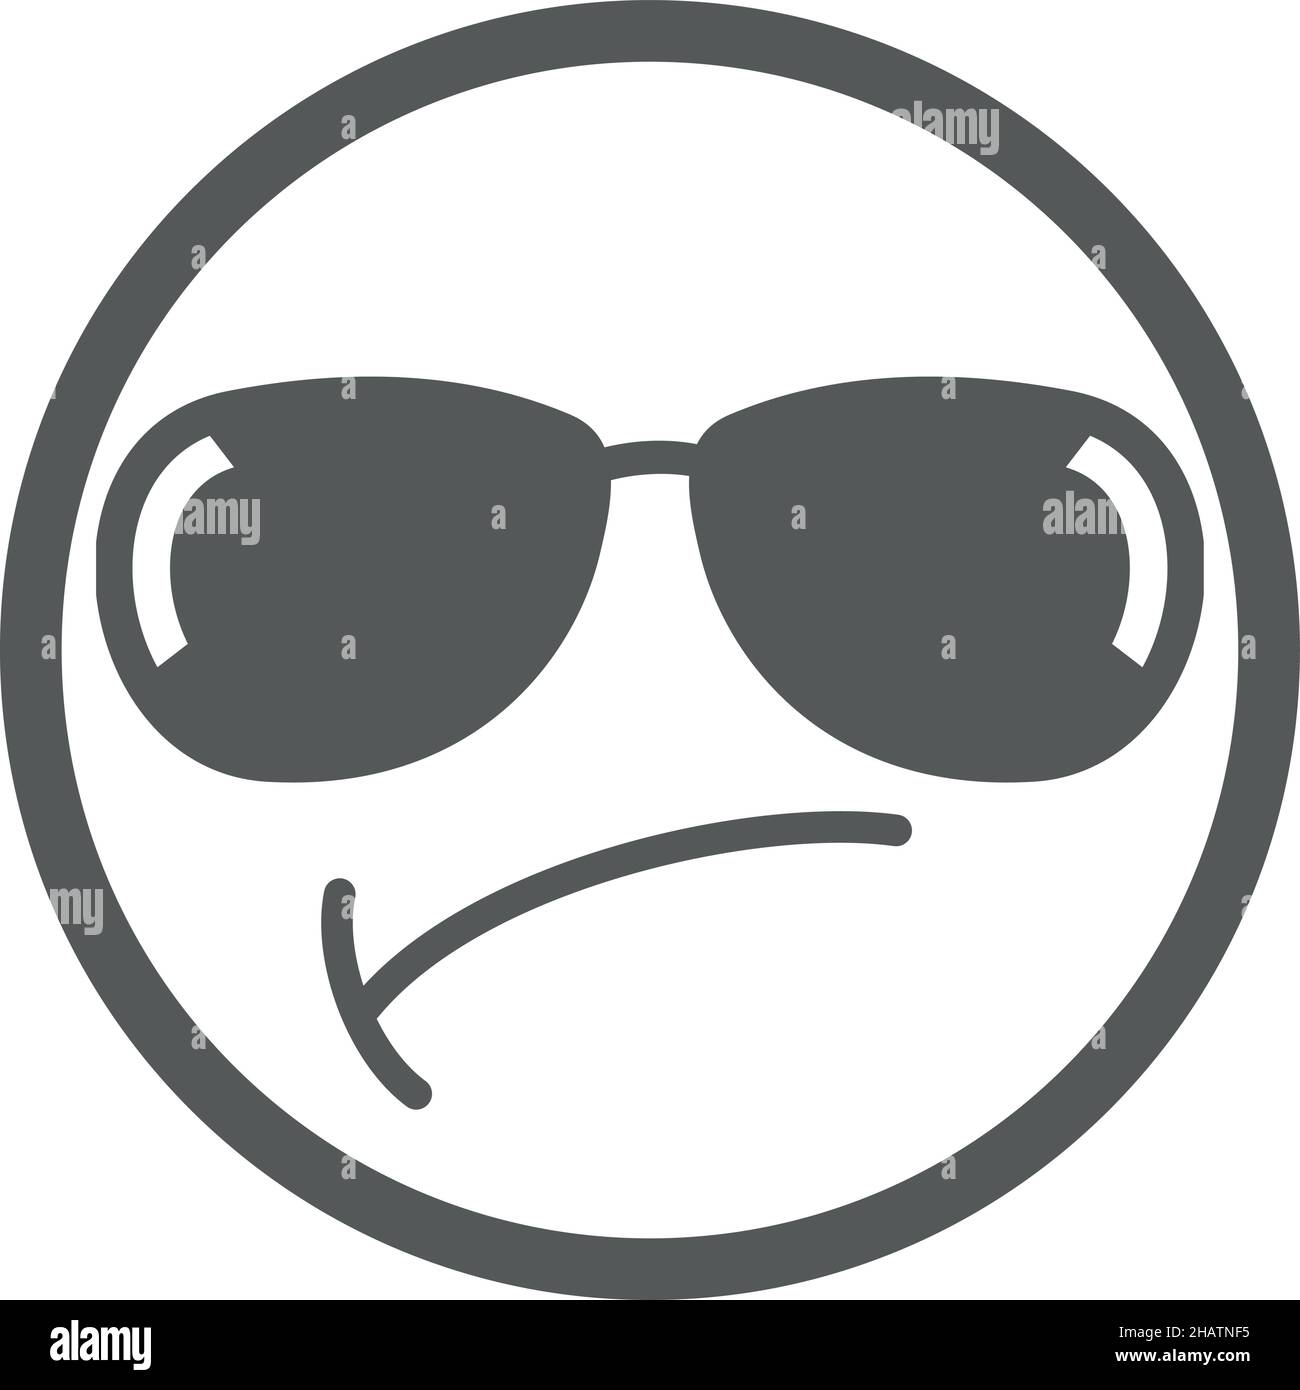 Bossy emoticon. Arrogant and imperious face in sunglasses Stock Vector